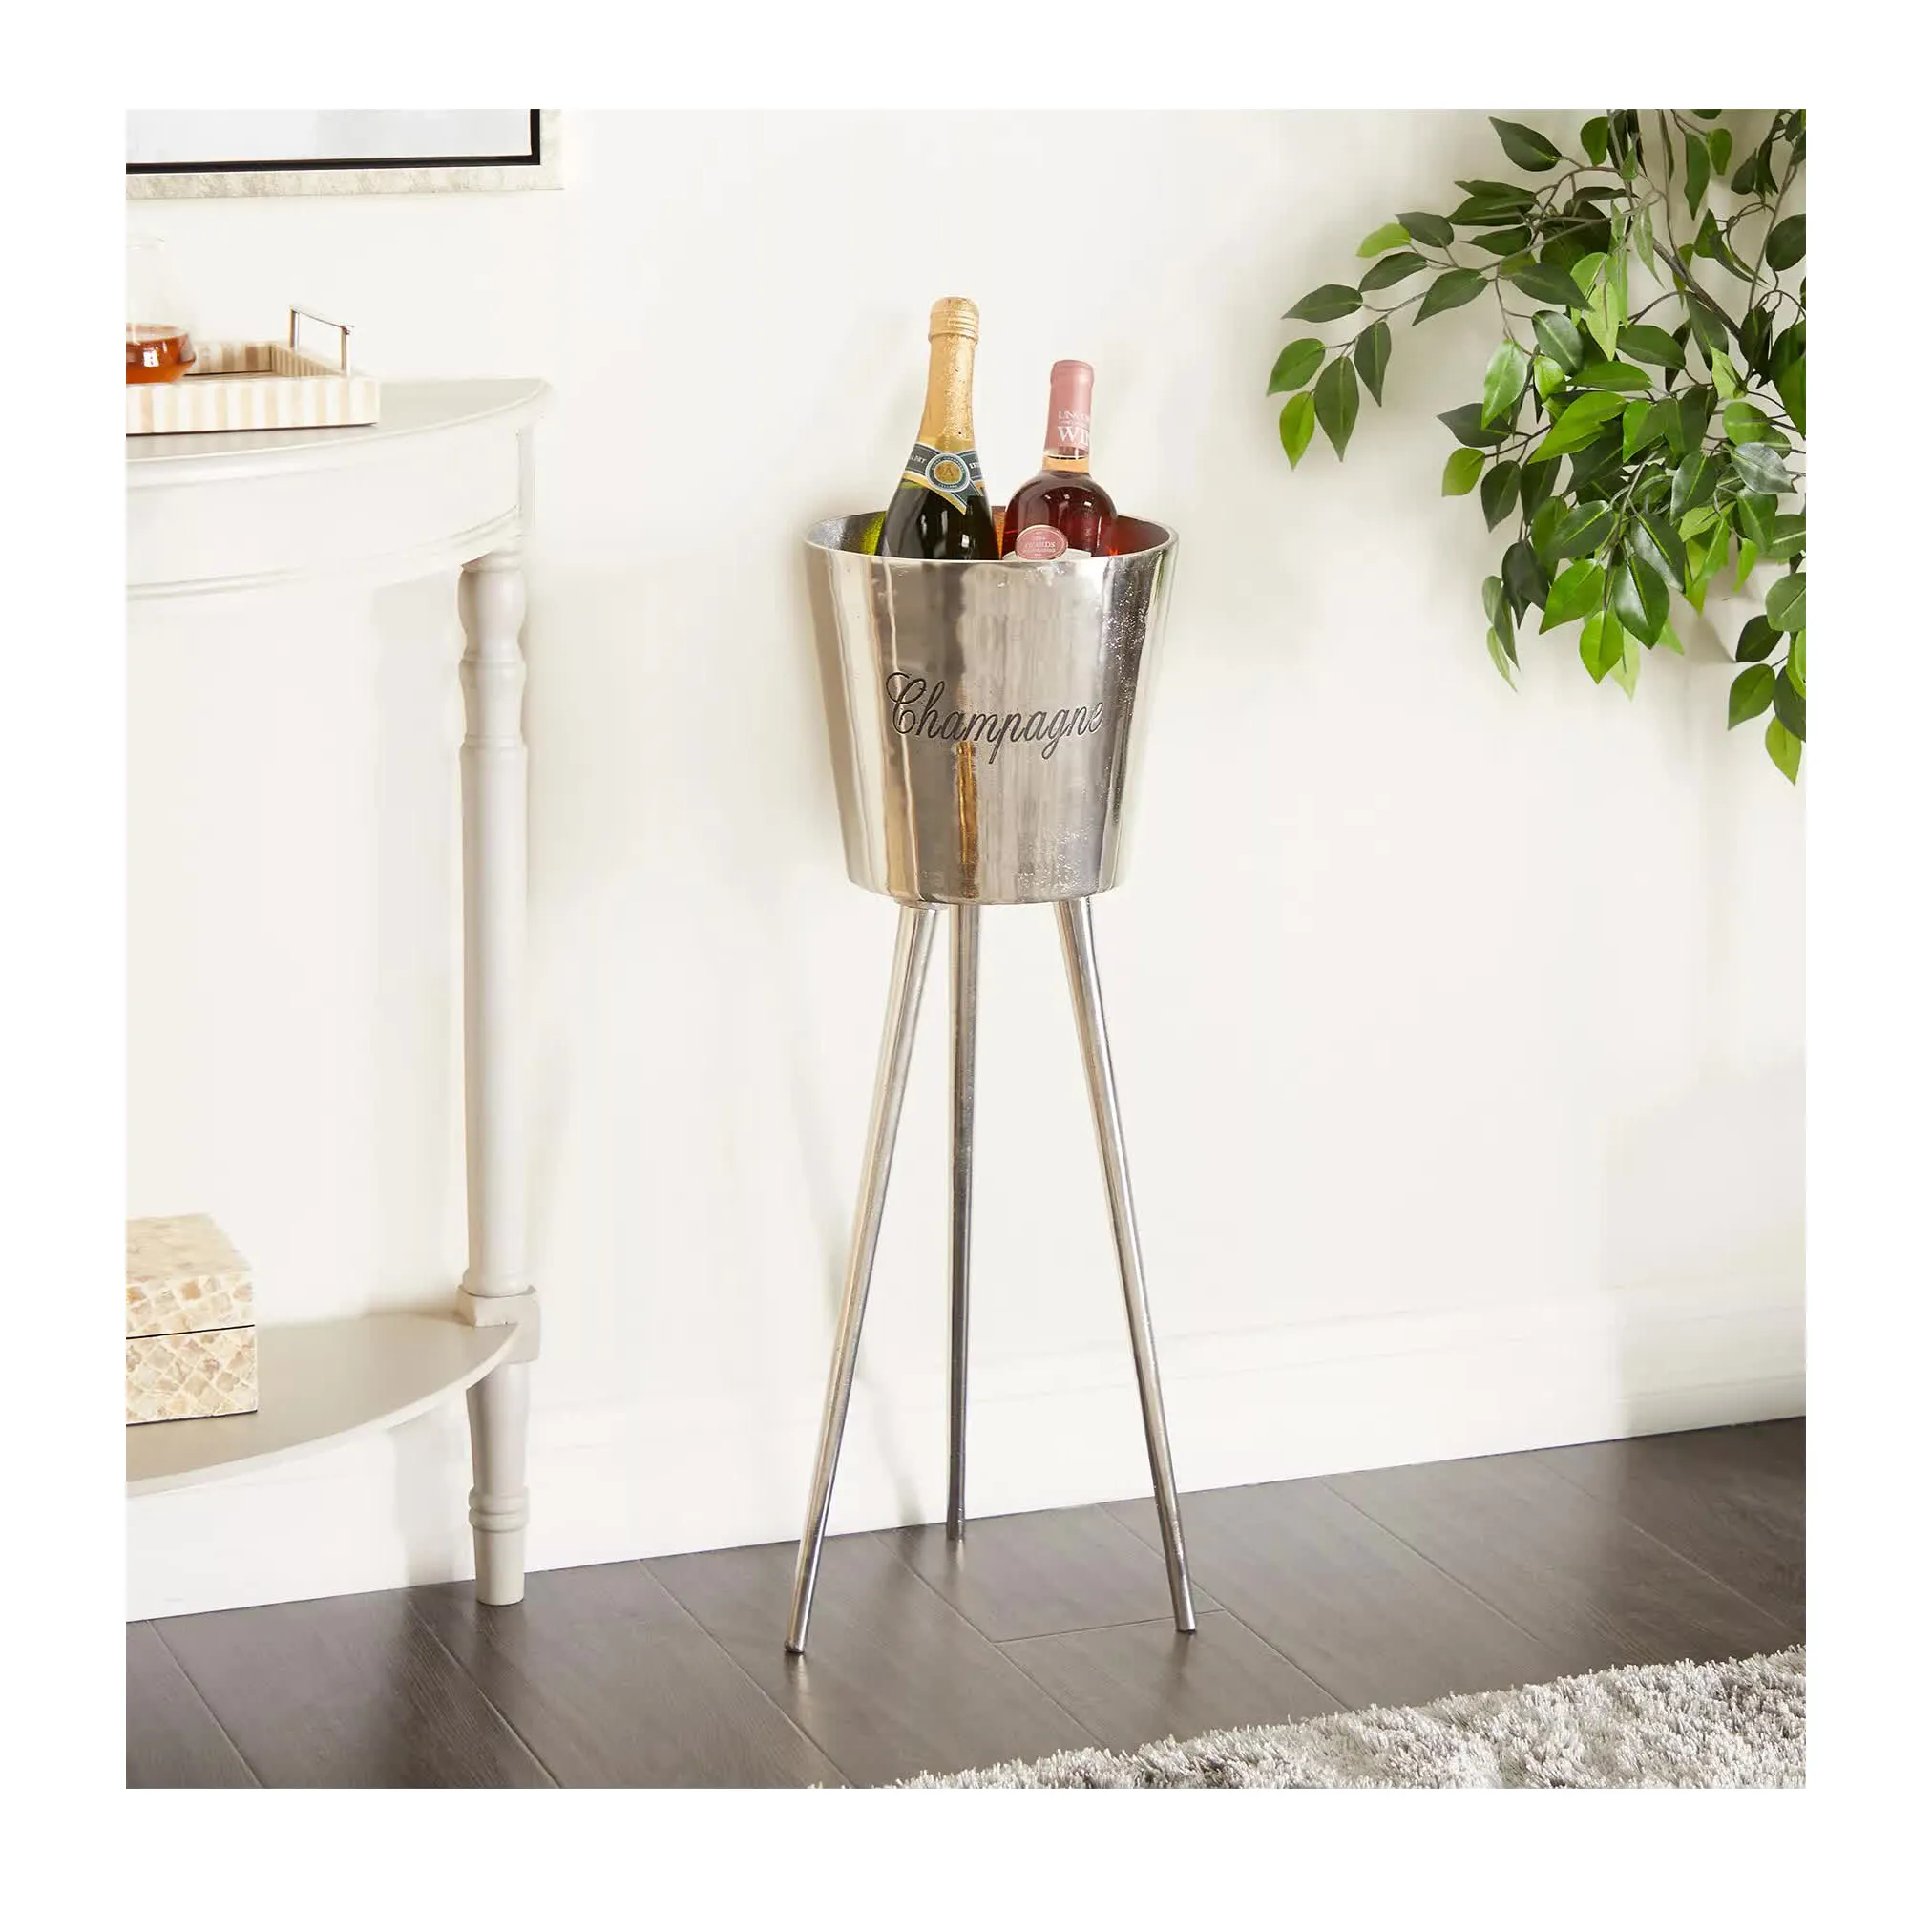 High Quality Nickel Color Champagne Ice Bucket with 3 Leg Stands for Events Party Decor Cheapest Price Wine Cooler Silver Color